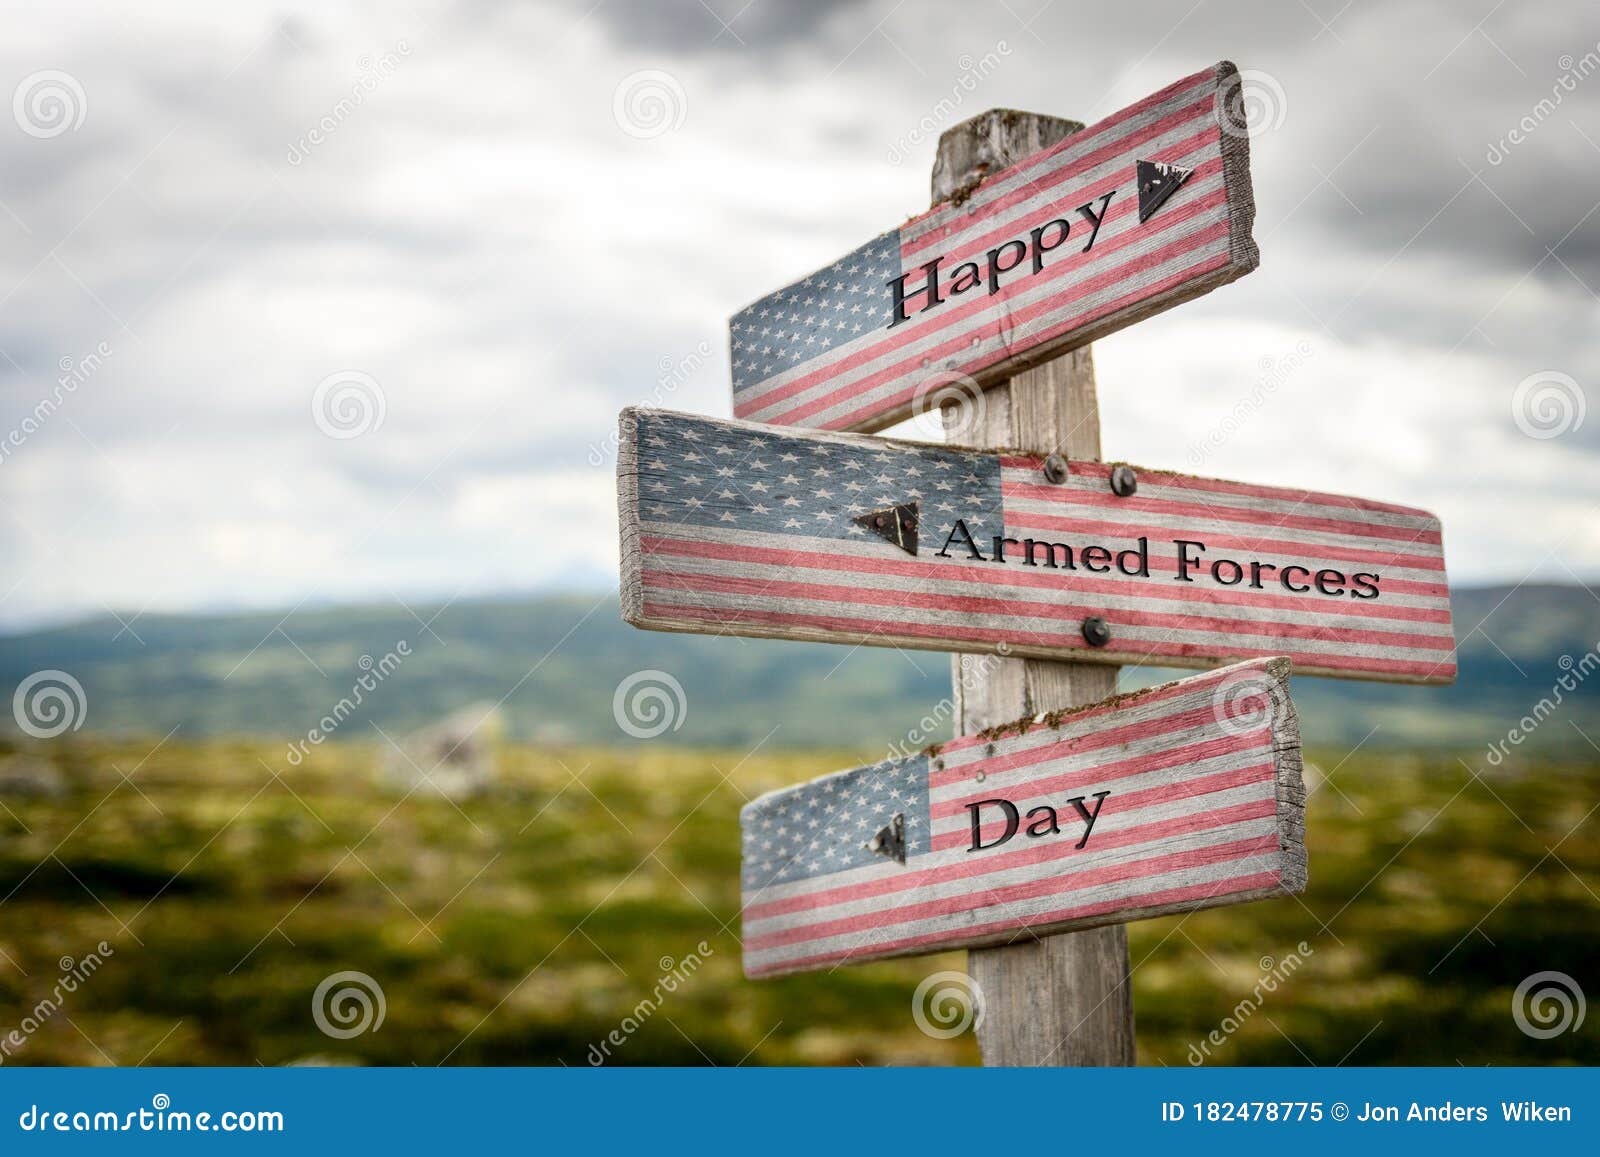 happy armed forces day text on wooden american flag signpost outdoors